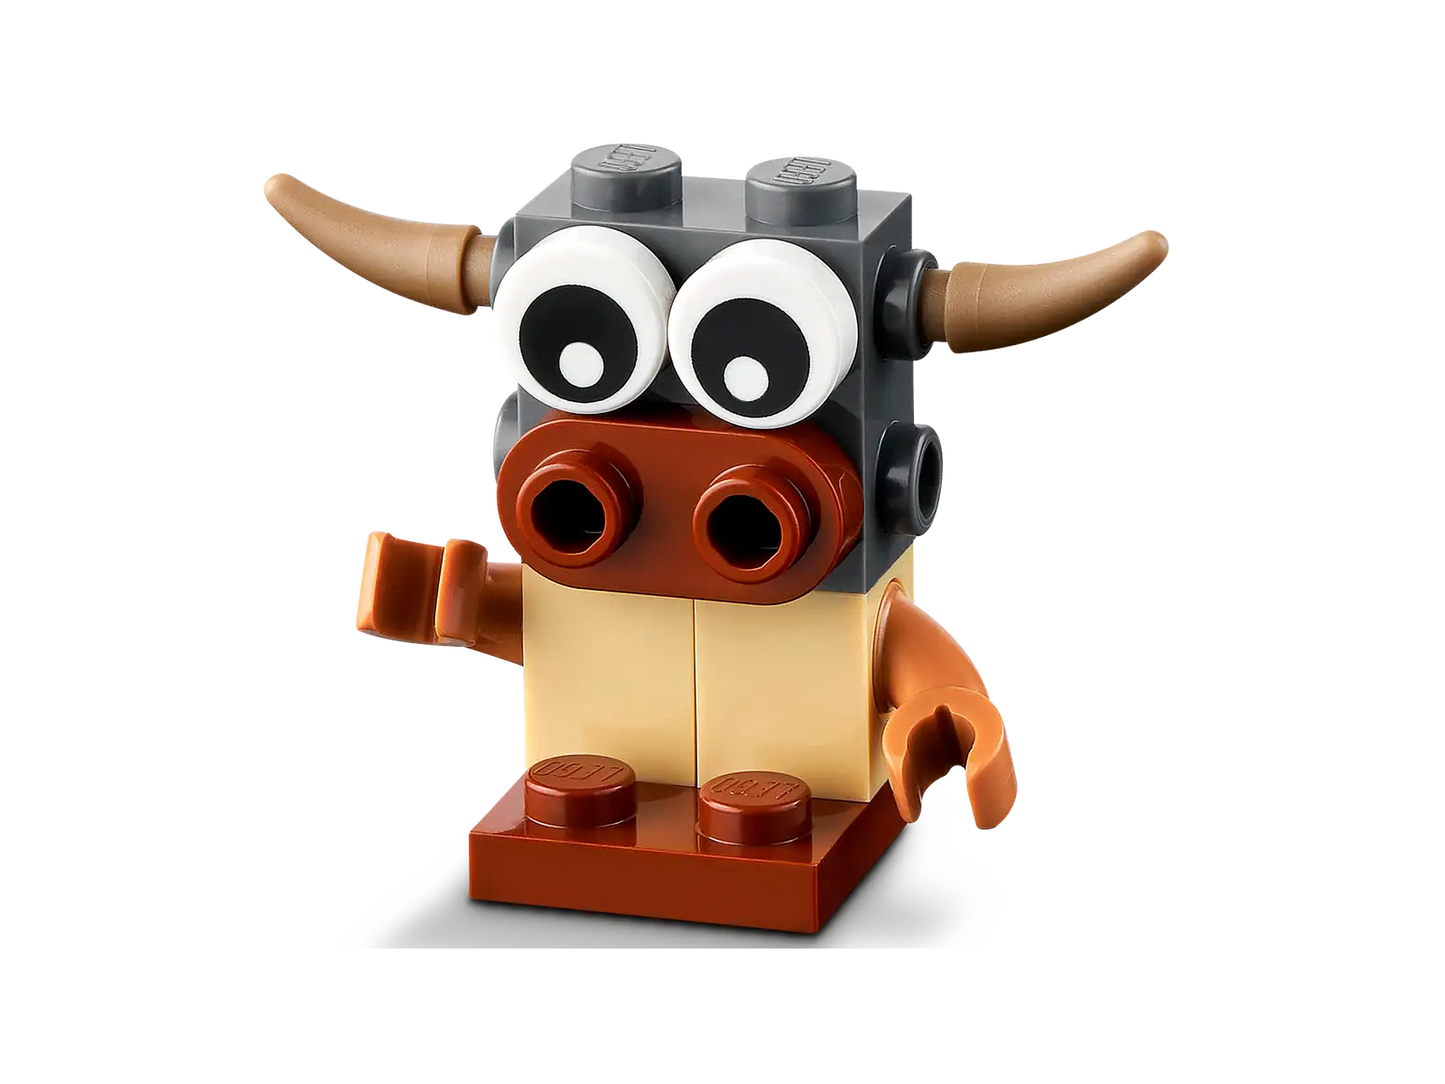 LEGO Classic - Monsters